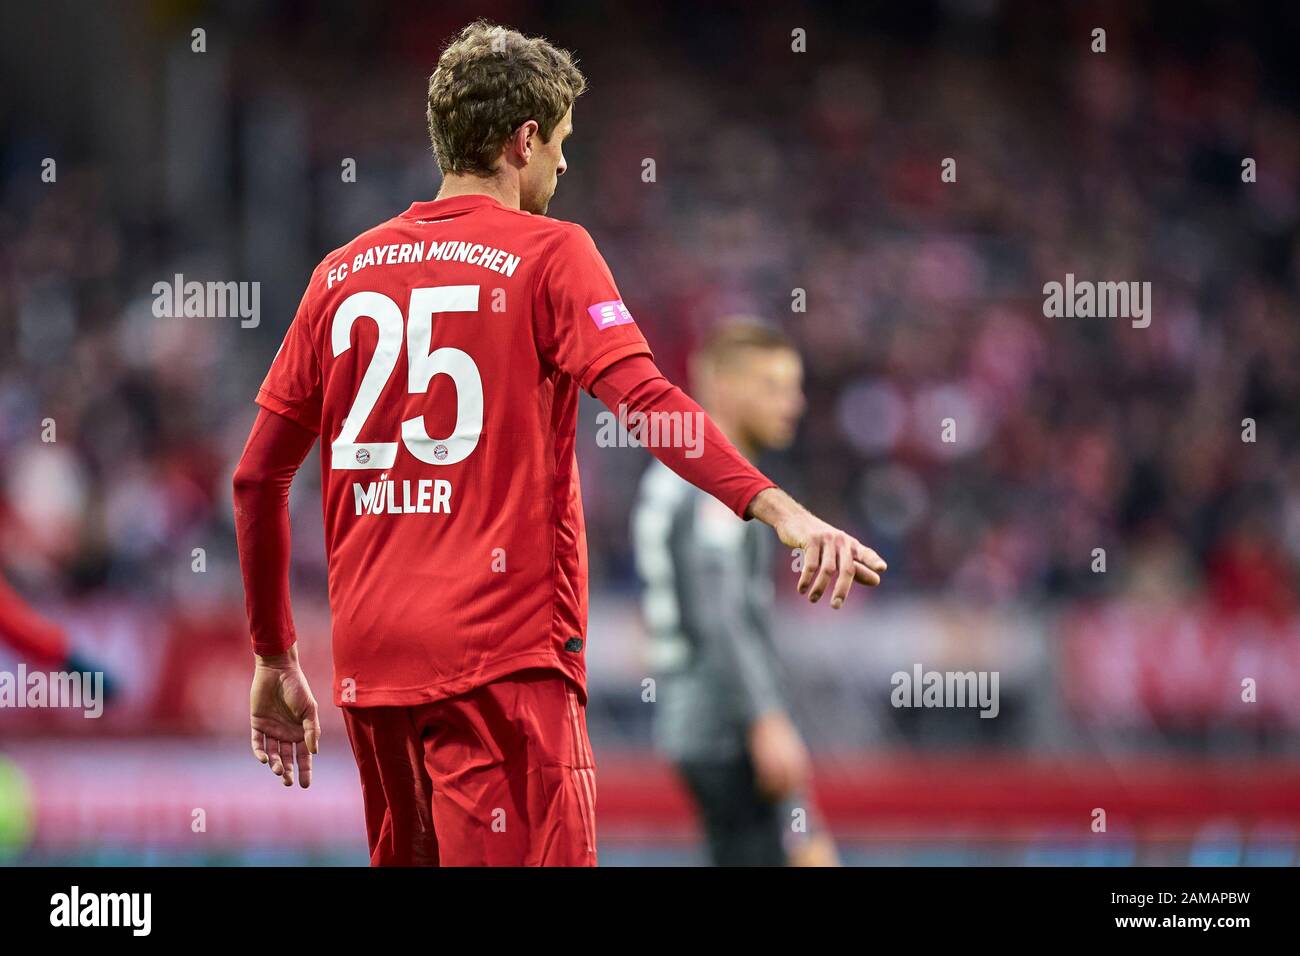 Page 2 - Max Muller High Resolution Stock Photography and Images - Alamy